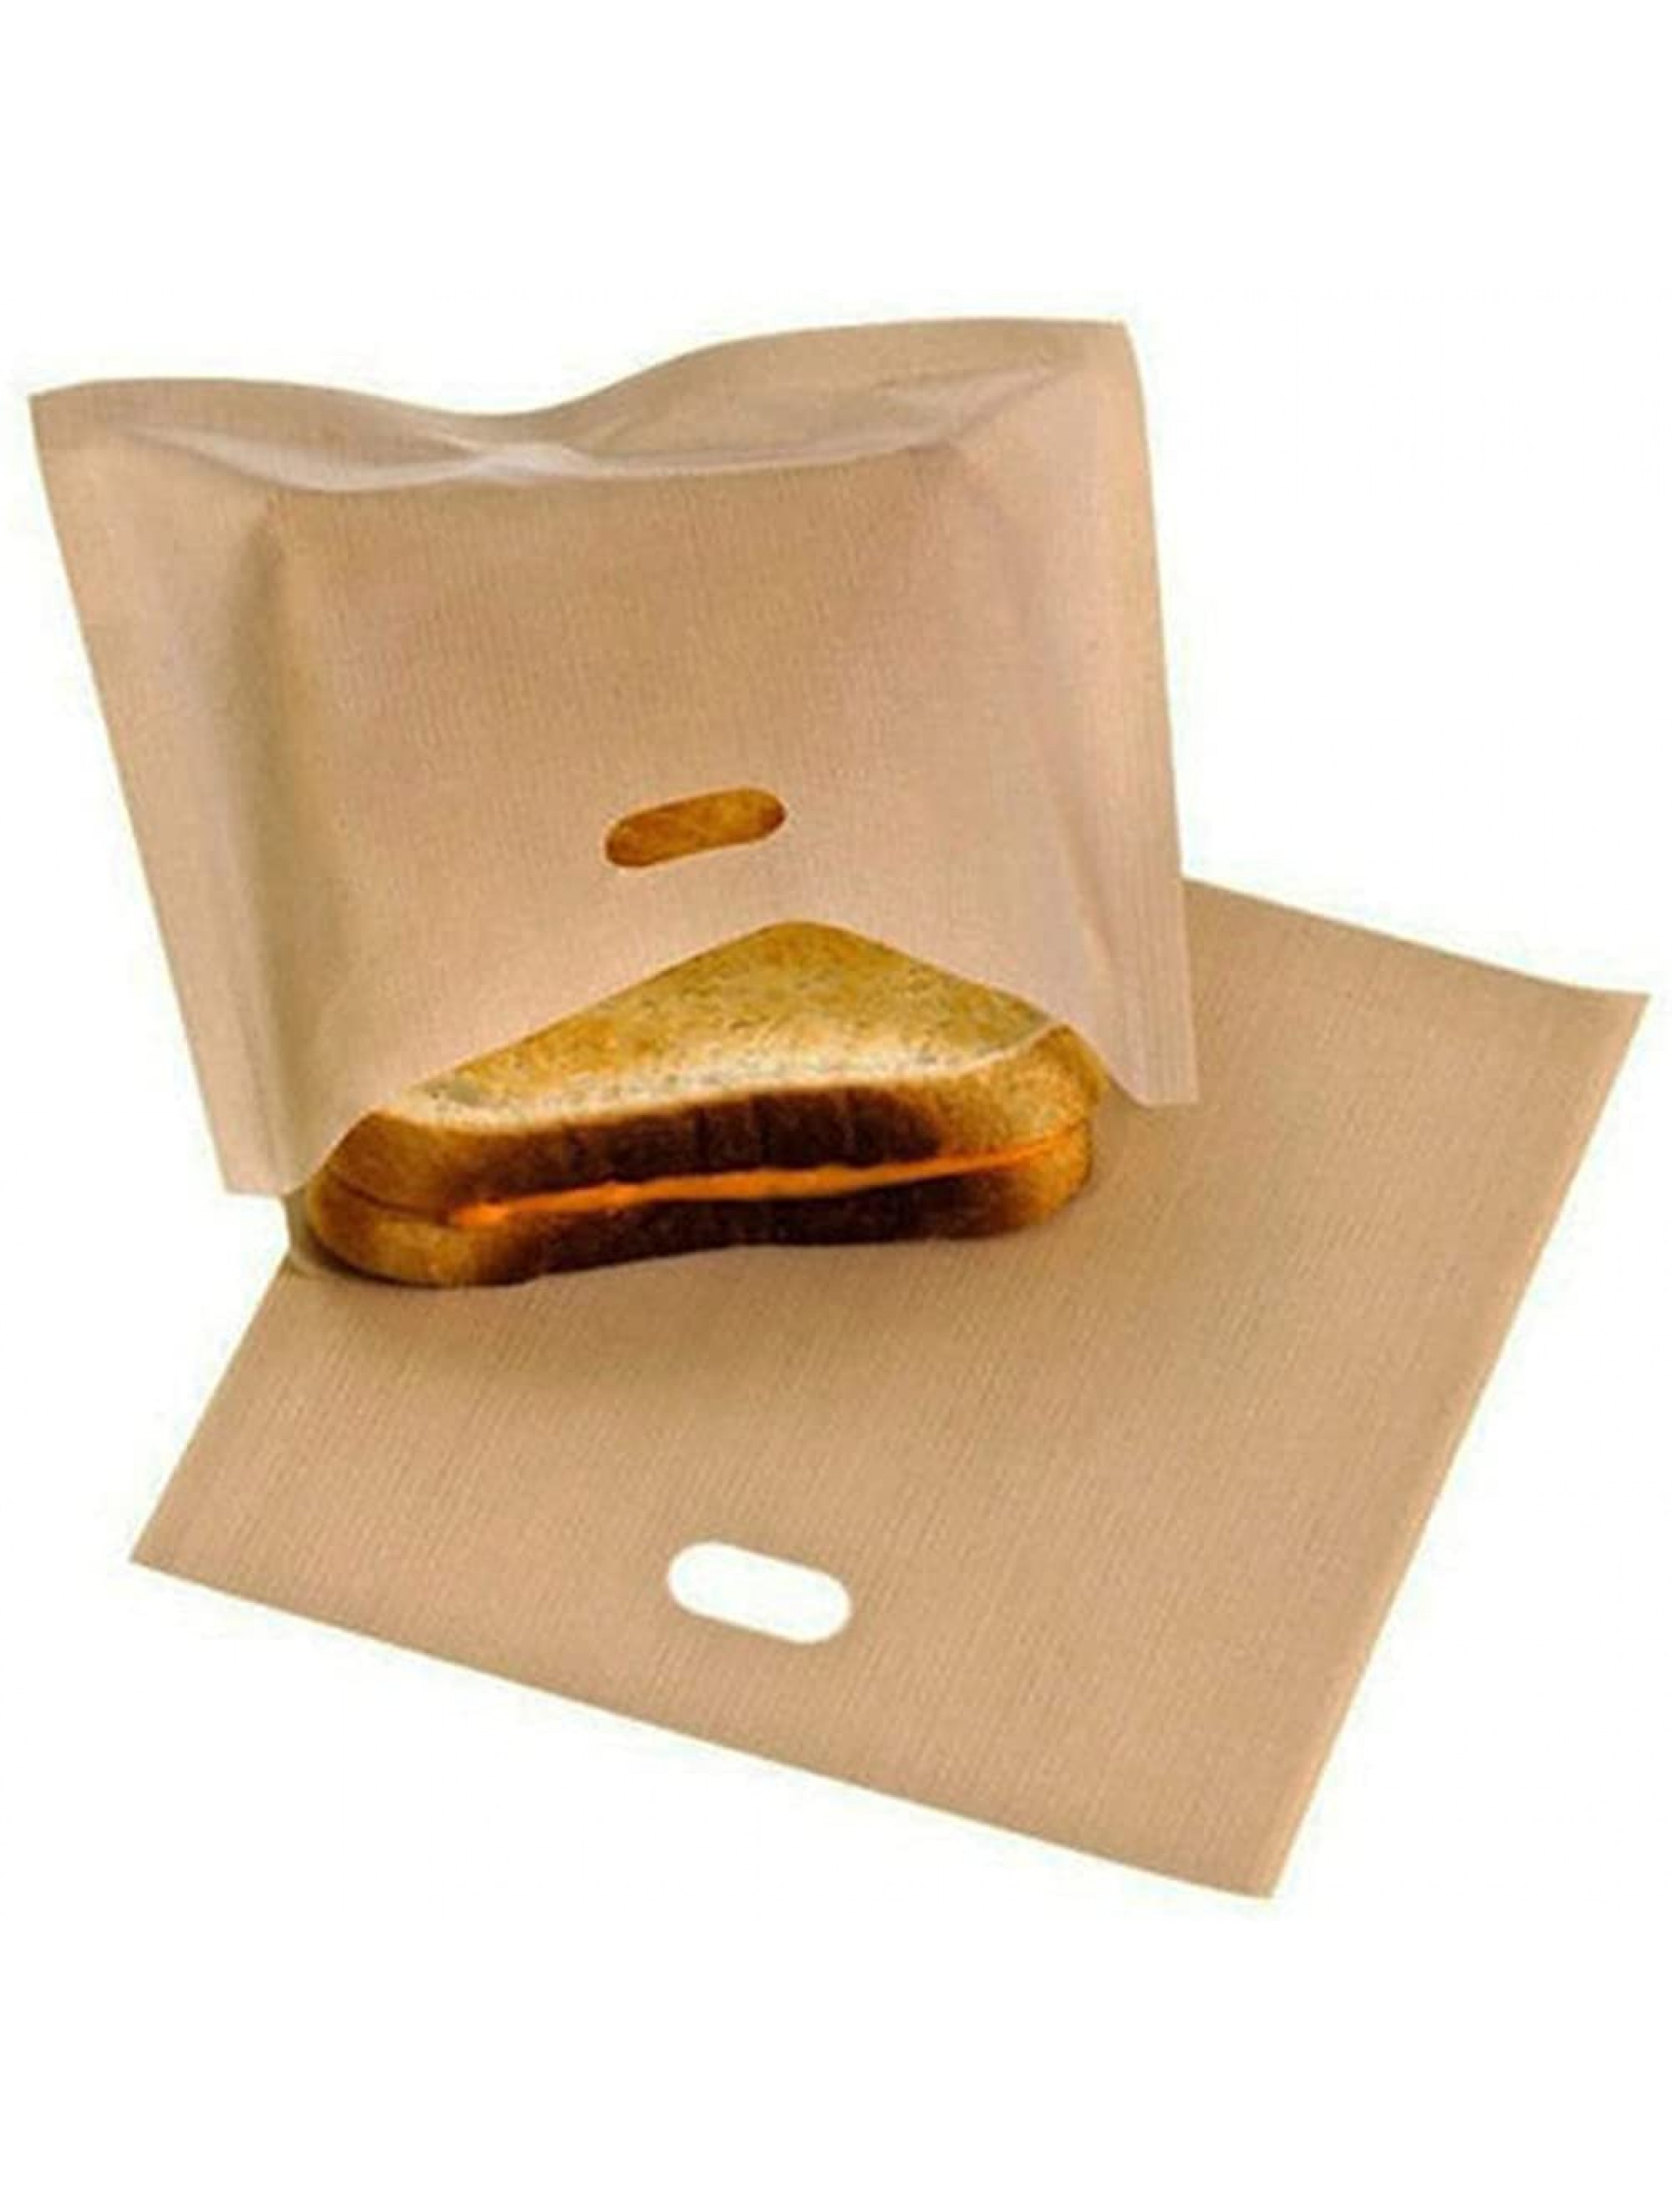 SHHMA Toaster Bags 10 Pcs Toaster Pockets for Grilled Cheese Sandwiches Pizza Panini Toast Washable Arbitrary Cropping,16x16.5cm - BEFS0HFBU